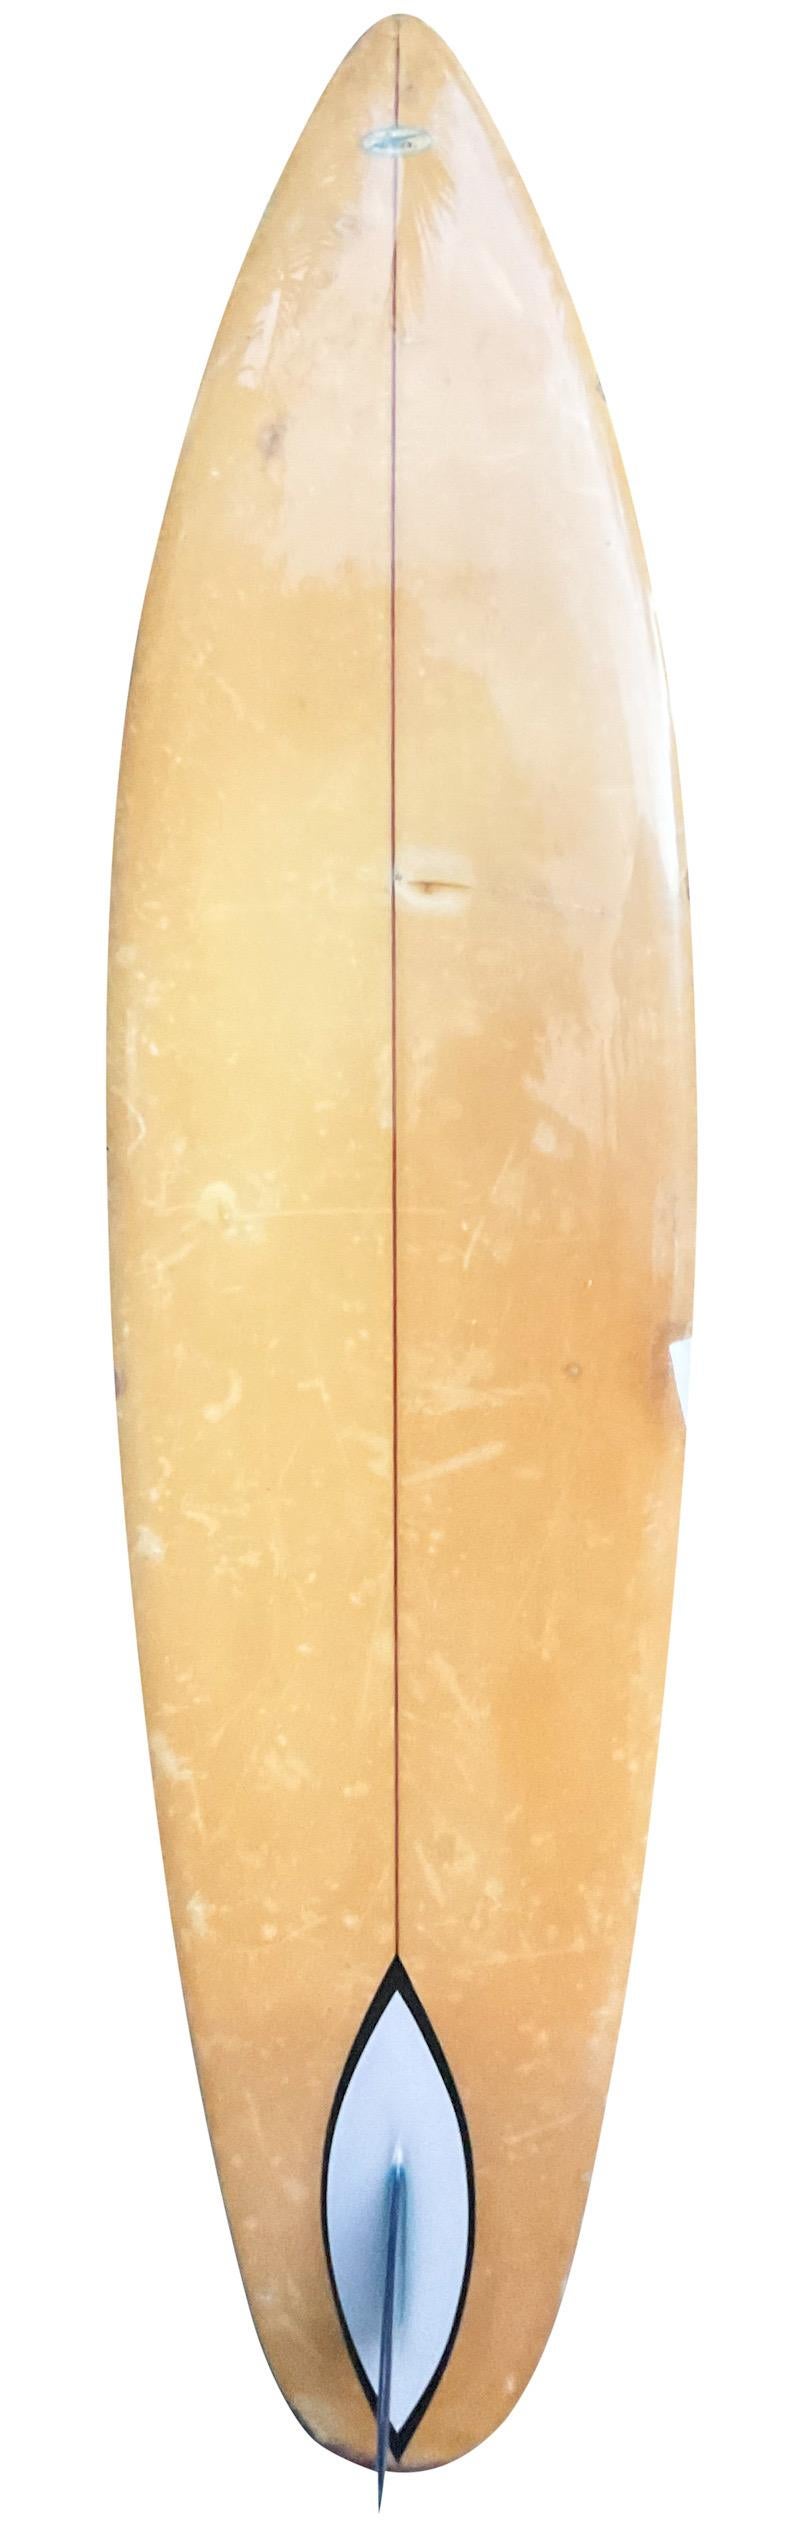 Late-1960s Gerry Lopez Hansen Surfboards single fin. Features a transitional era surfboard shape—created when surfboards first started to be shaped shorter in length for maneuverability. Designed by the legendary surfer Gerry Lopez. A beautiful